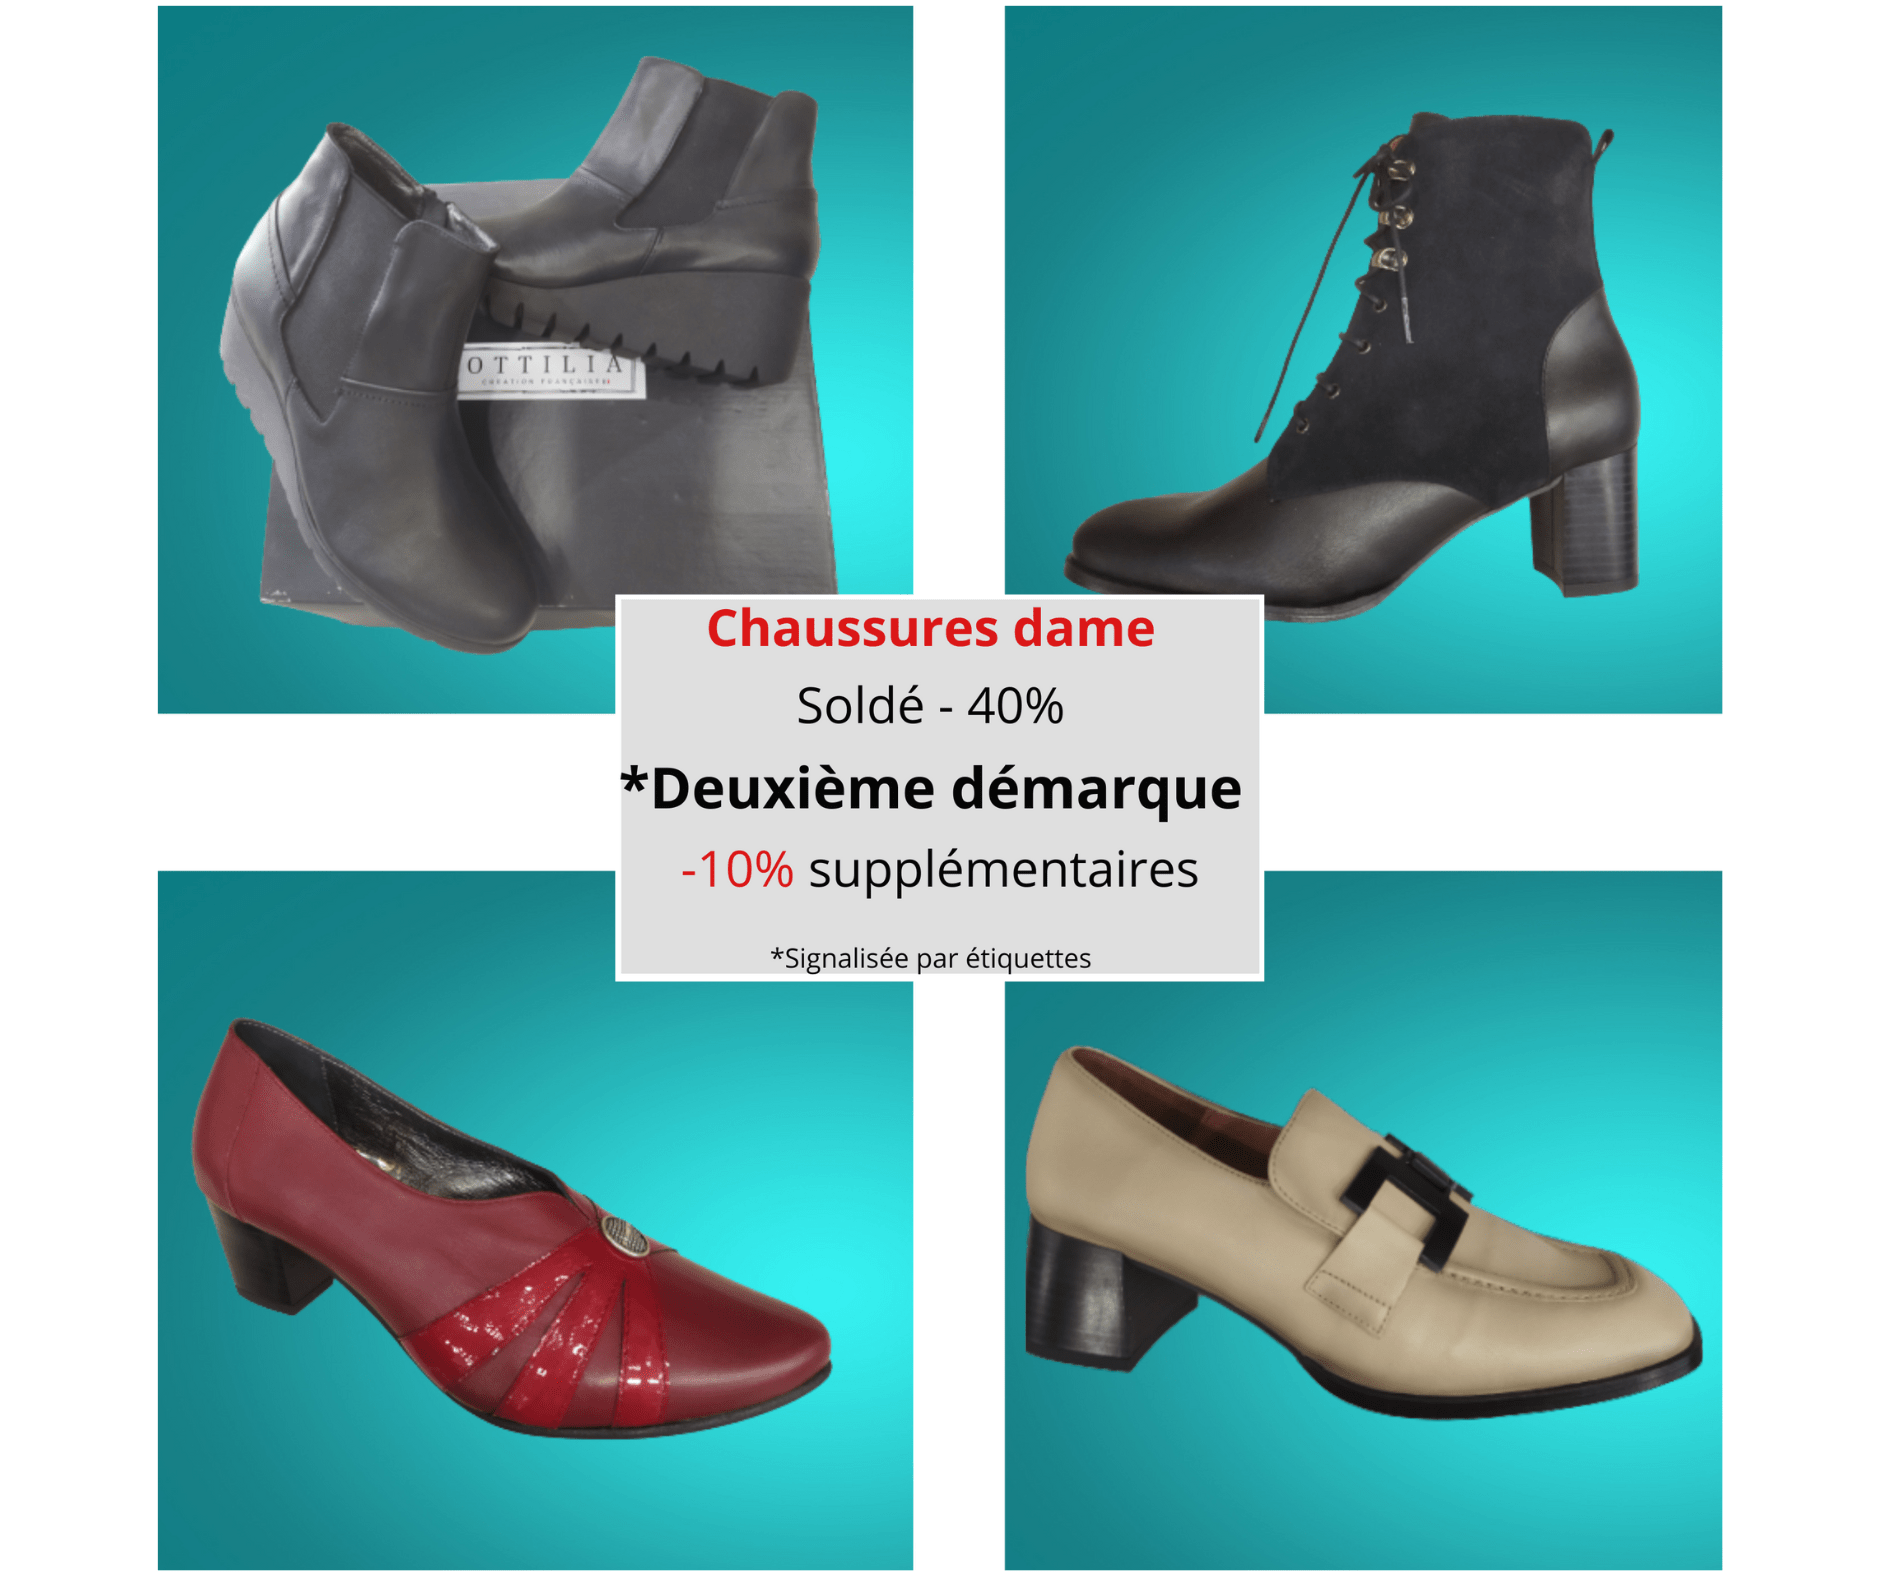 Démarque chaussures dame